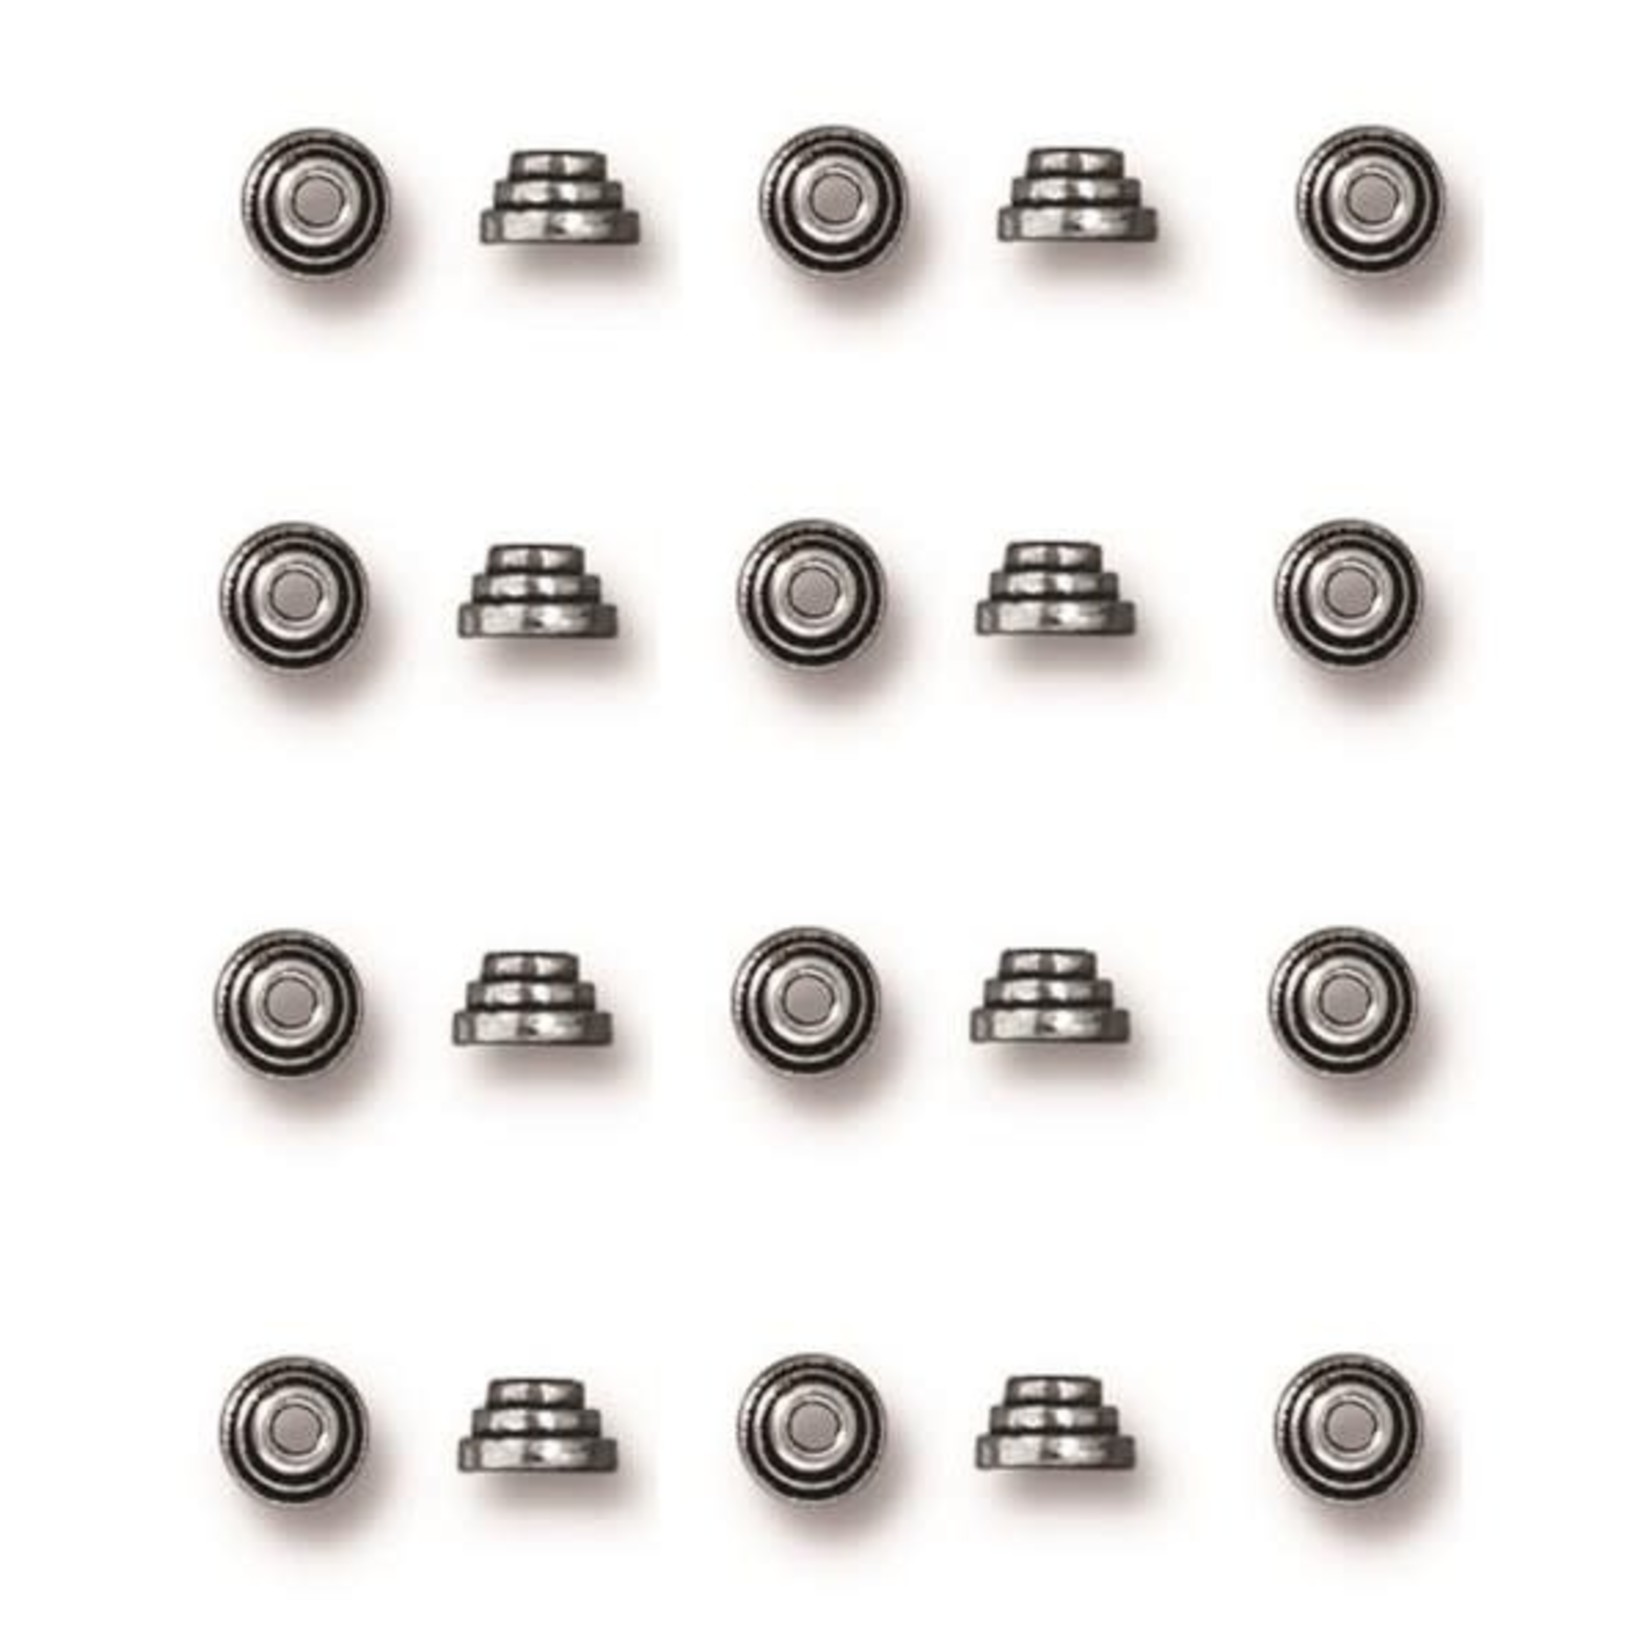 TierraCast Stepped Bead Cap 4mm  Antique Silver Plated - 20 pieces